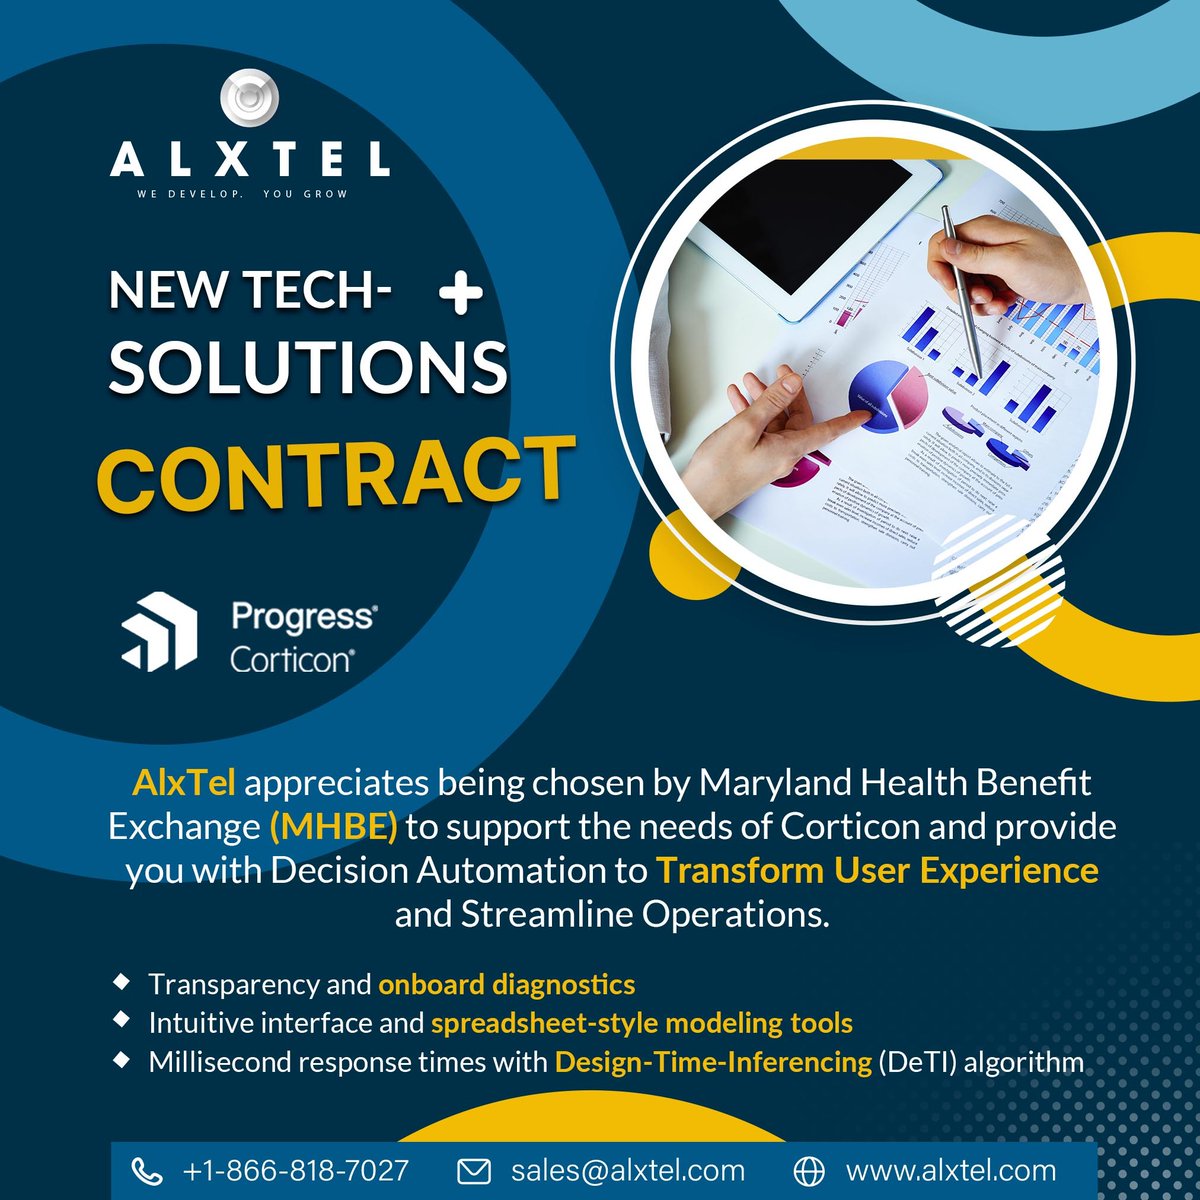 Great news this morning. AlxTel just got awarded 2 years agreement with Maryland Health Benefit Exchange to support Corticon BRMS Business Rules Management Engine powered by Progress.

#technology #automation #userexperience #customerexperience #digital 
#workflowautomation